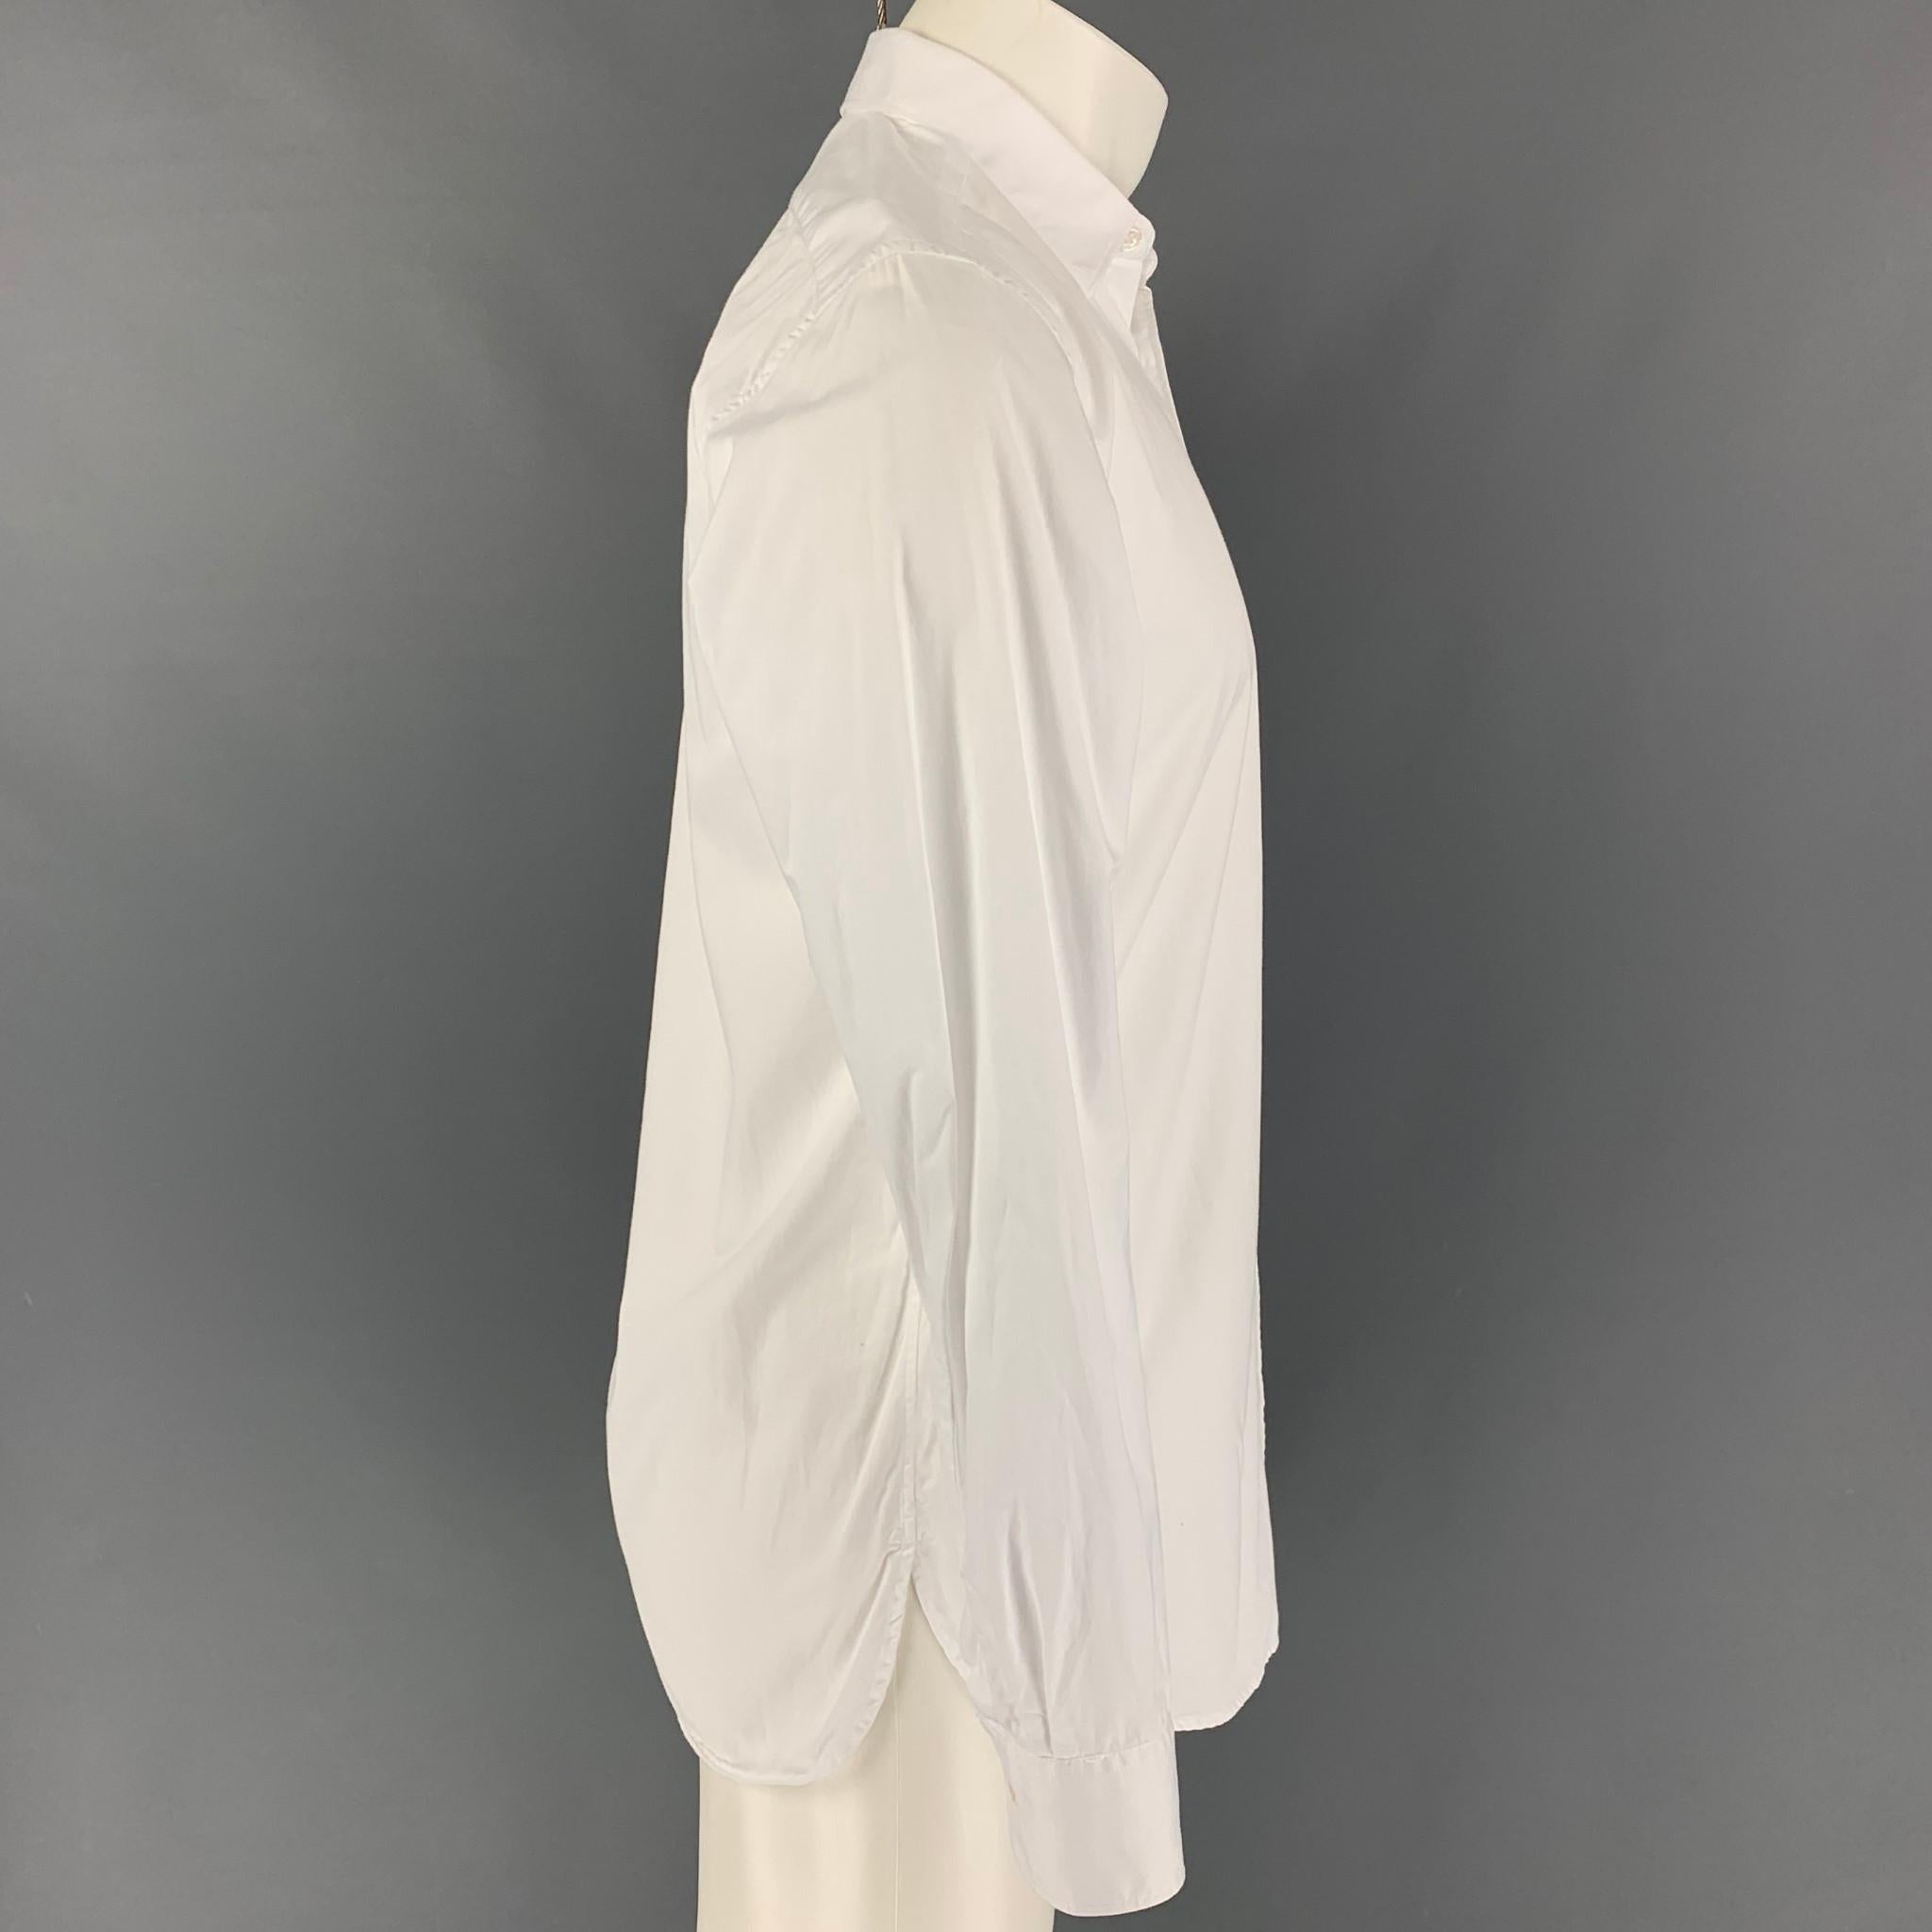 GOLDEN GOOSE long sleeve shirt comes in a white cotton featuring a classic style, spread collar, skater embroidered detail, and a button up closure. Made in Italy. 

Very Good Pre-Owned Condition.
Marked: S

Measurements:

Shoulder: 17.5 in.
Chest: